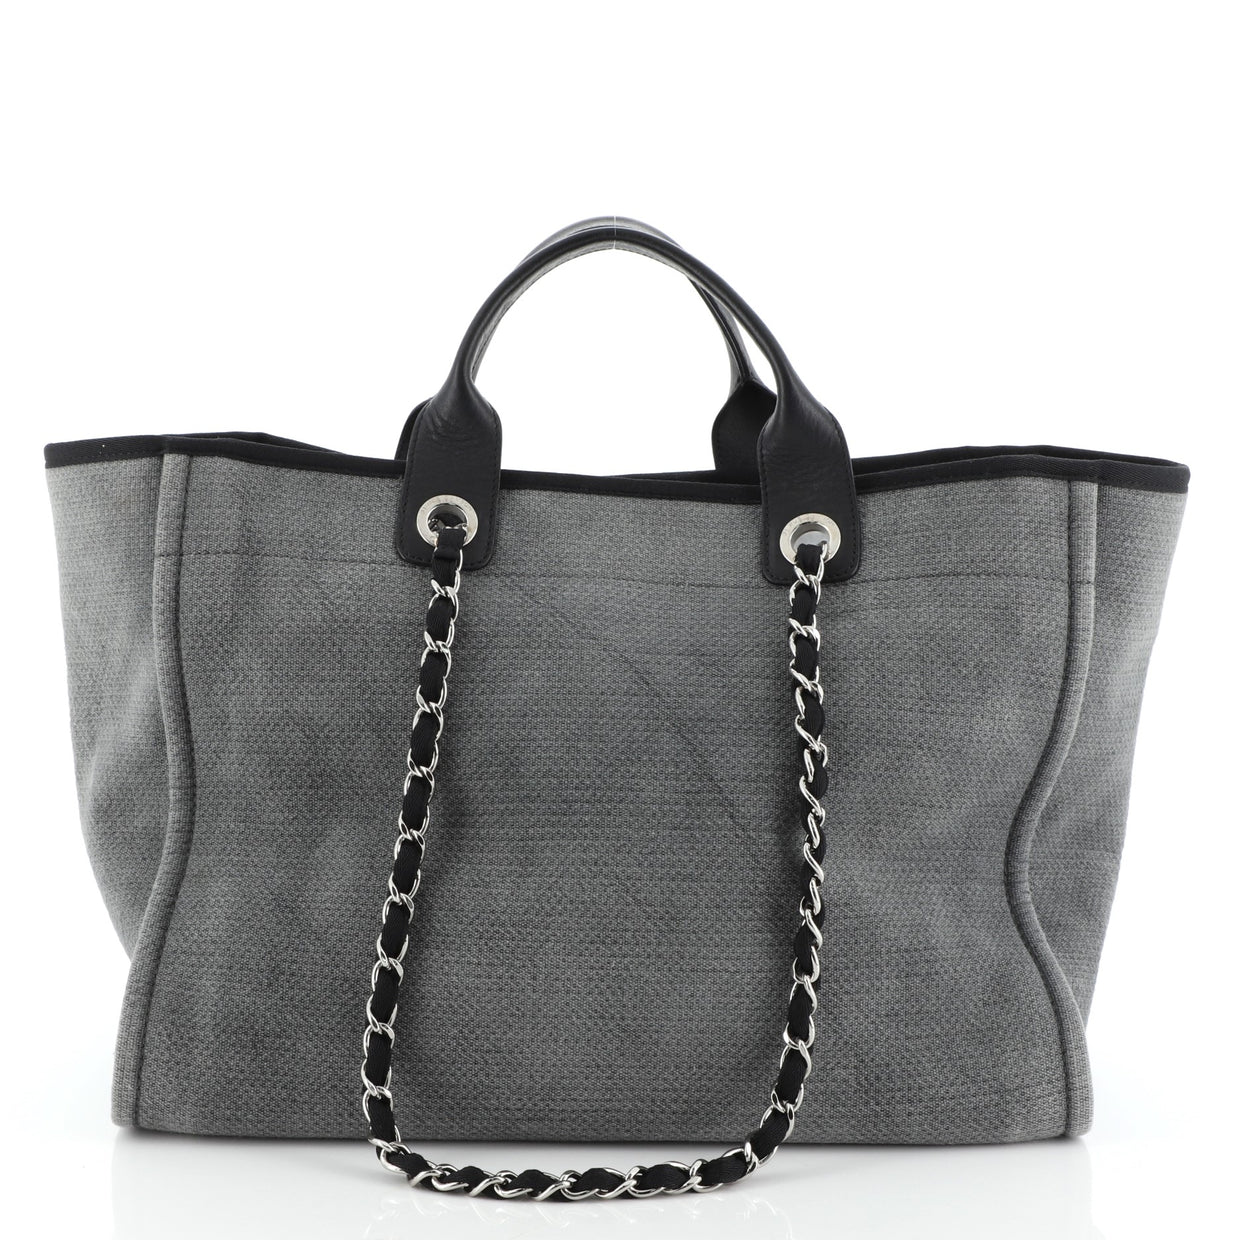 Chanel Deauville Tote Canvas Large Gray 50823188